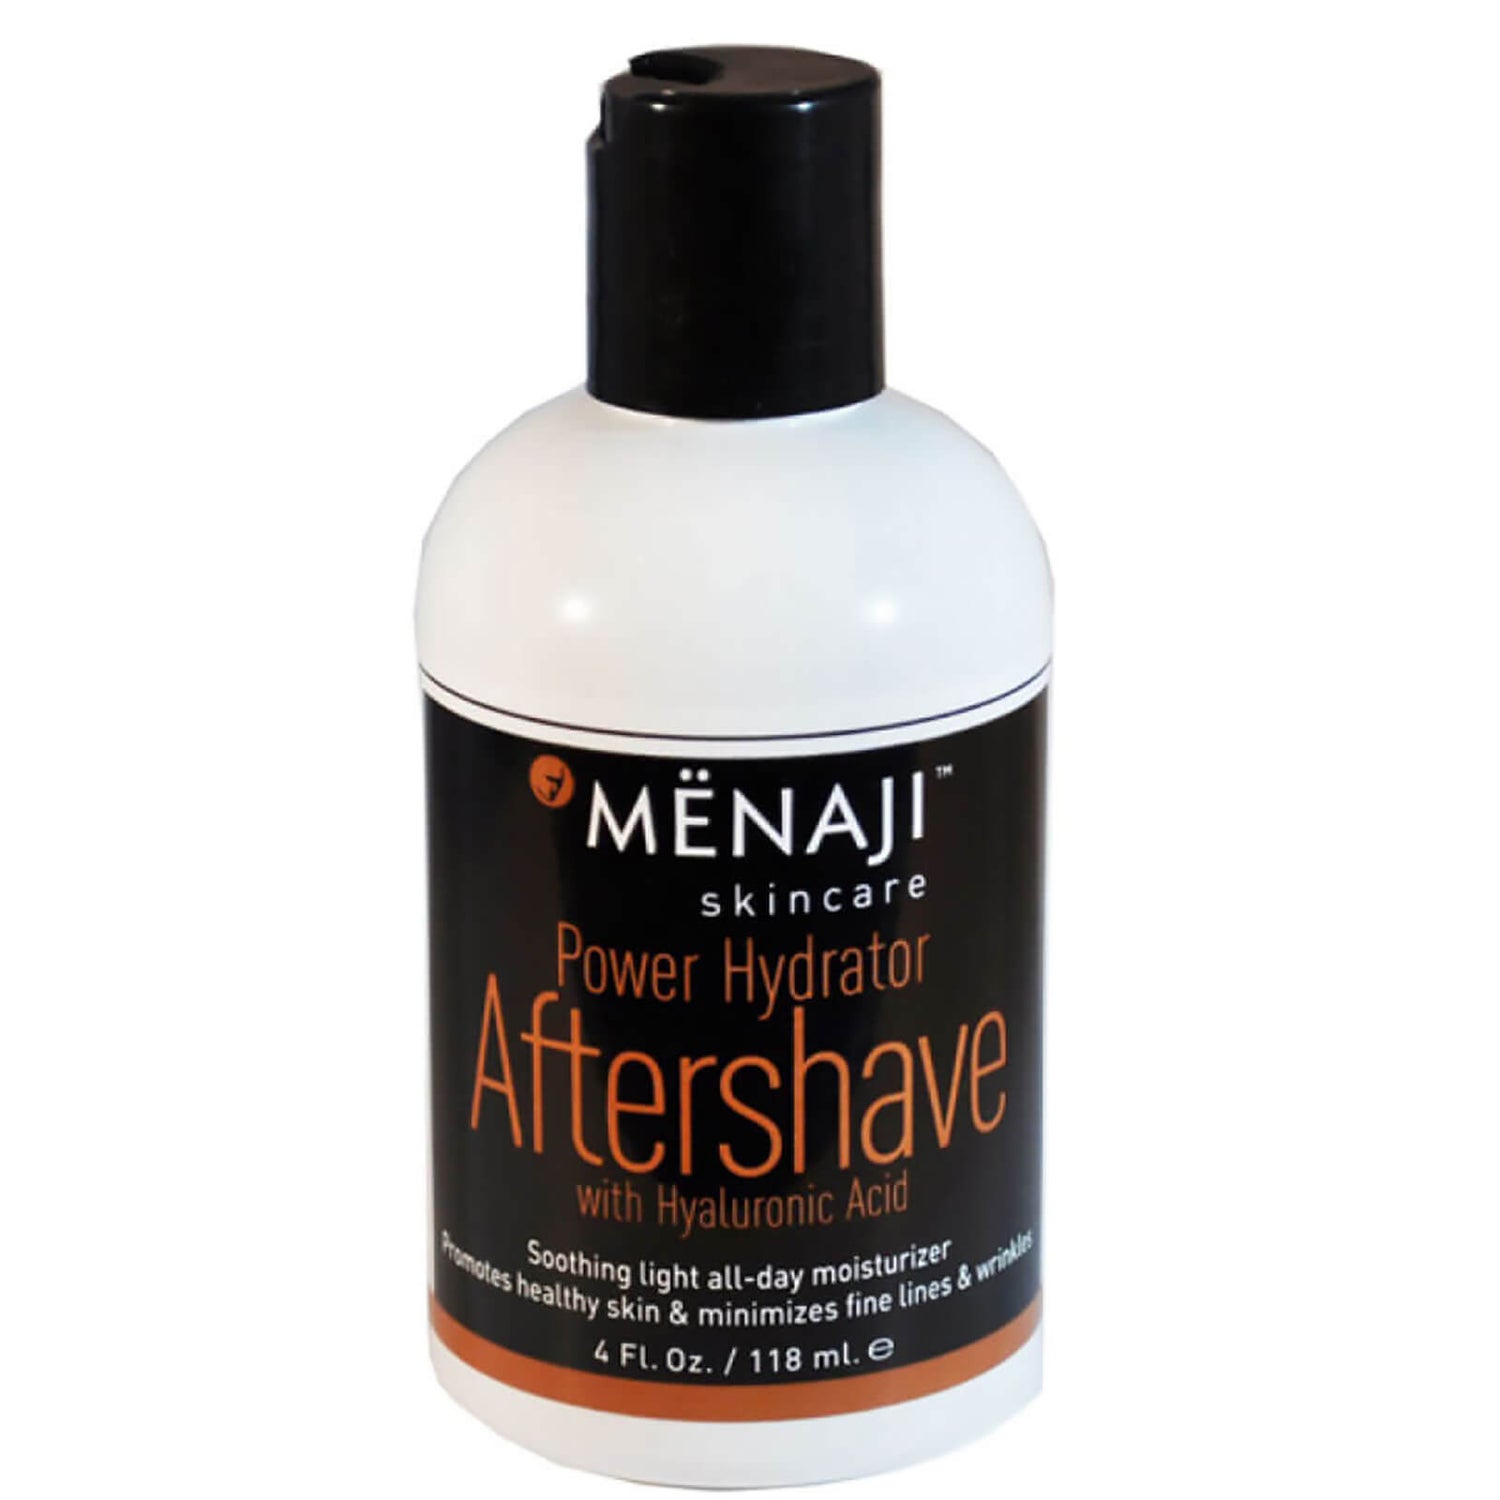 Menaji Power Hydrator Aftershave with Hyaluronic Acid -aftershave hyaluronihapolla (4oz./118ml)